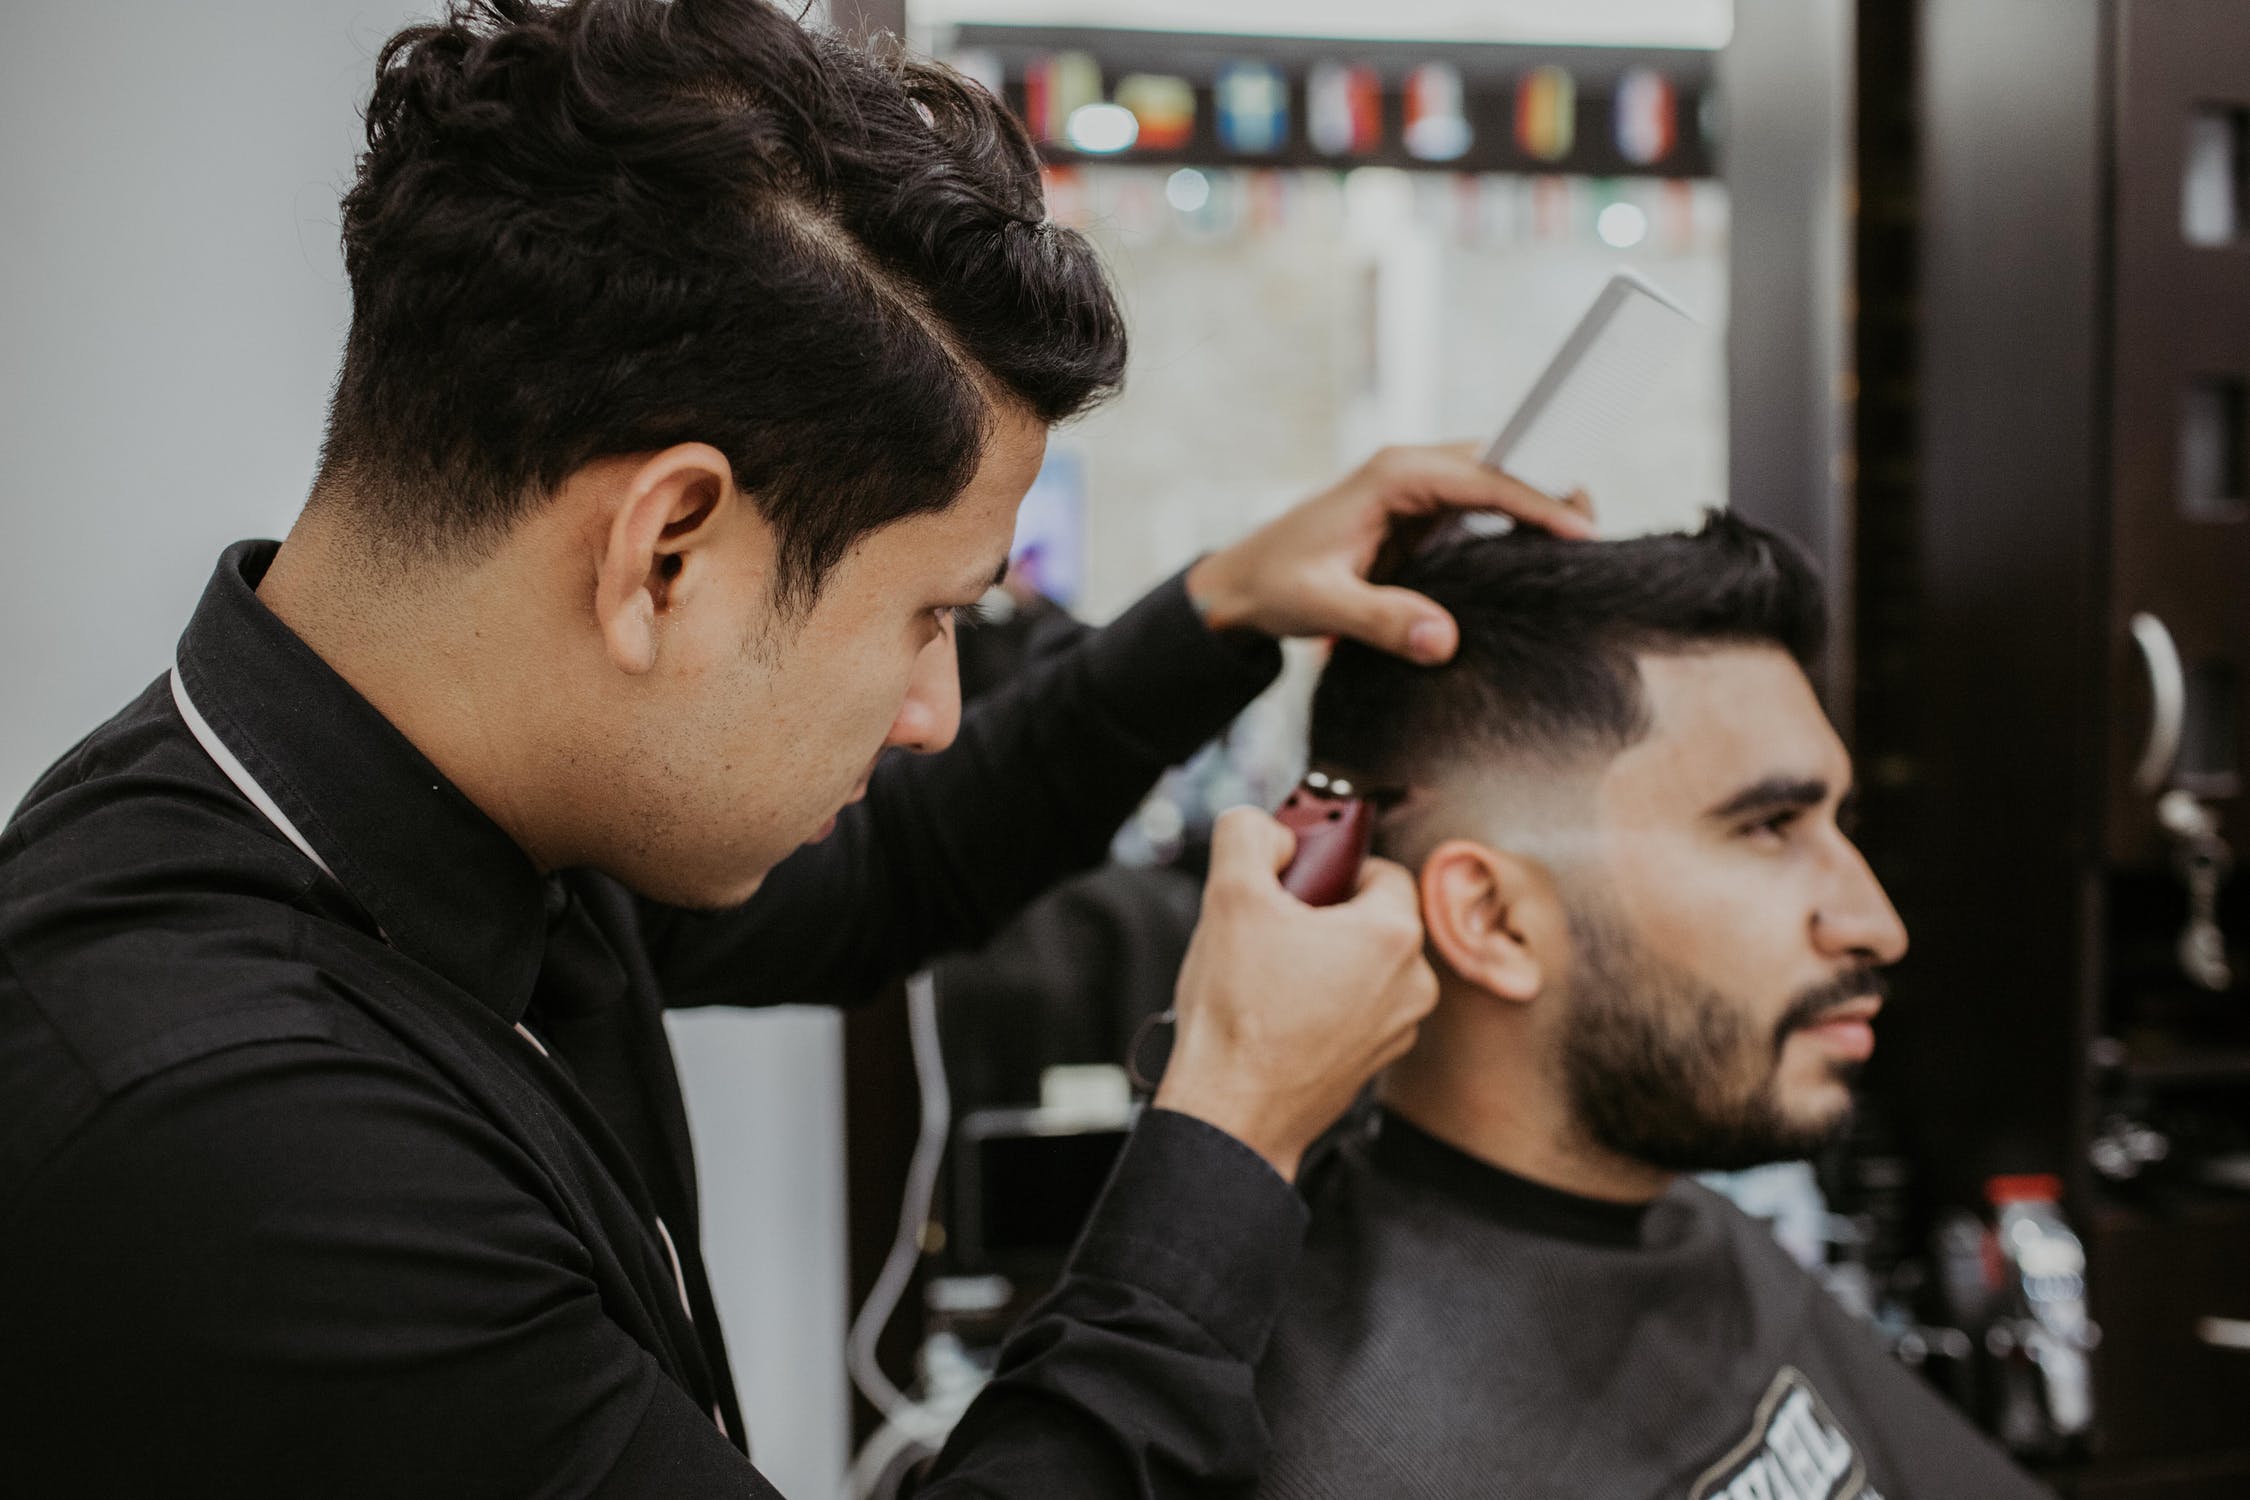 Skin Fade Haircuts - The absolute trend of 2019